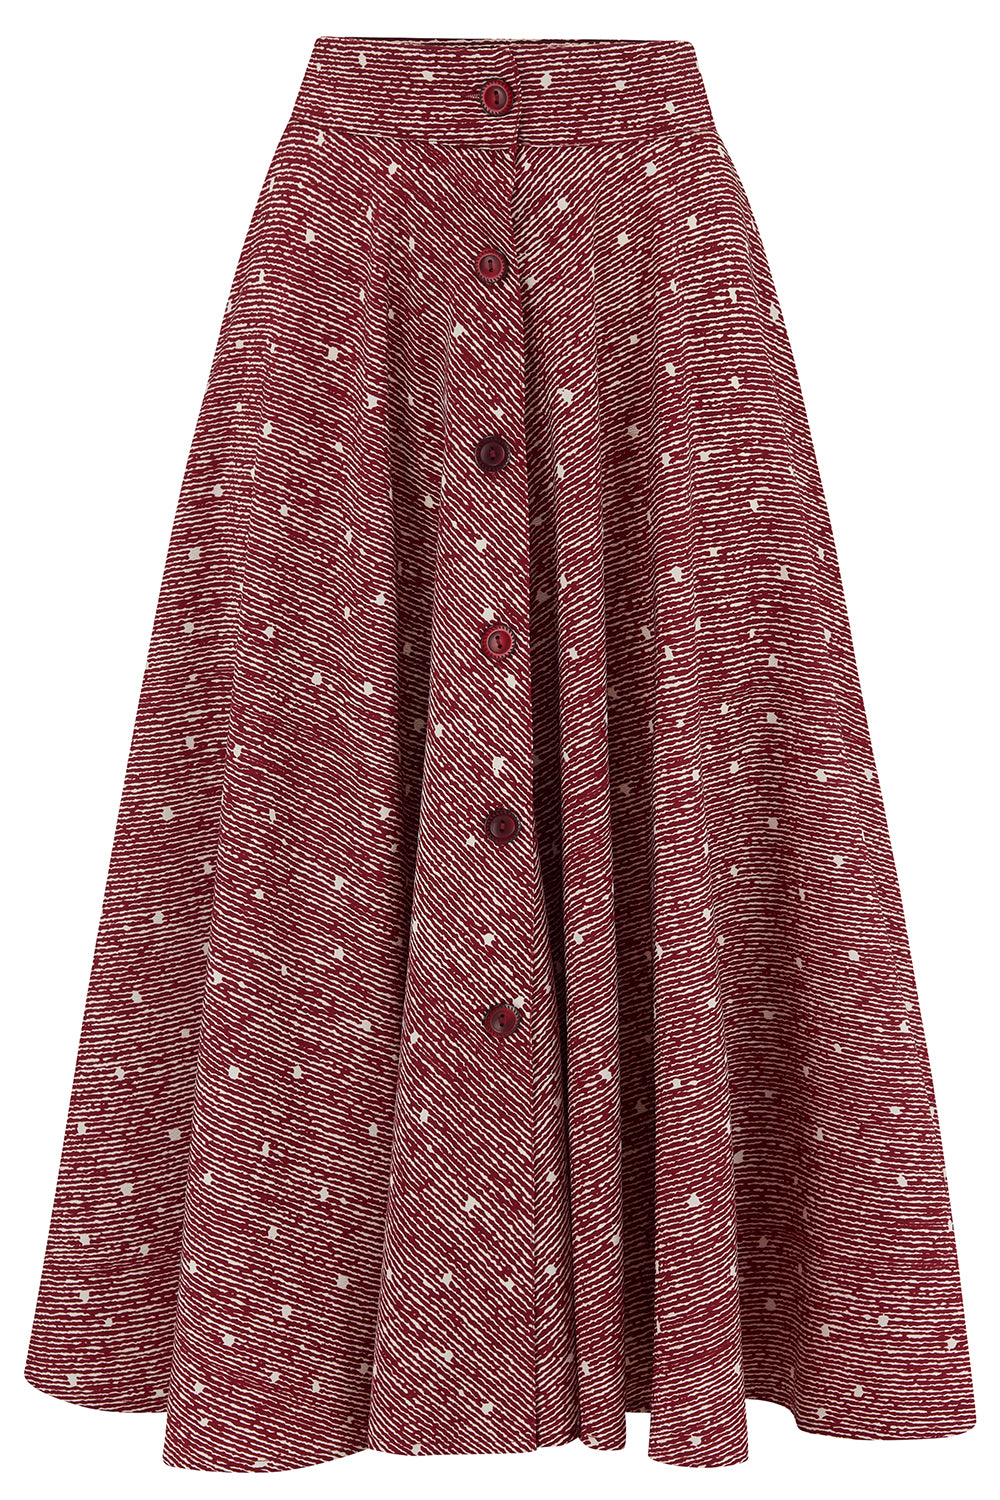 The "Beverly" Button Front Full Circle Skirt with Pockets in Wine Ditzy, Authentic 1950s Vintage Style - True and authentic vintage style clothing, inspired by the Classic styles of CC41 , WW2 and the fun 1950s RocknRoll era, for everyday wear plus events like Goodwood Revival, Twinwood Festival and Viva Las Vegas Rockabilly Weekend Rock n Romance Rock n Romance